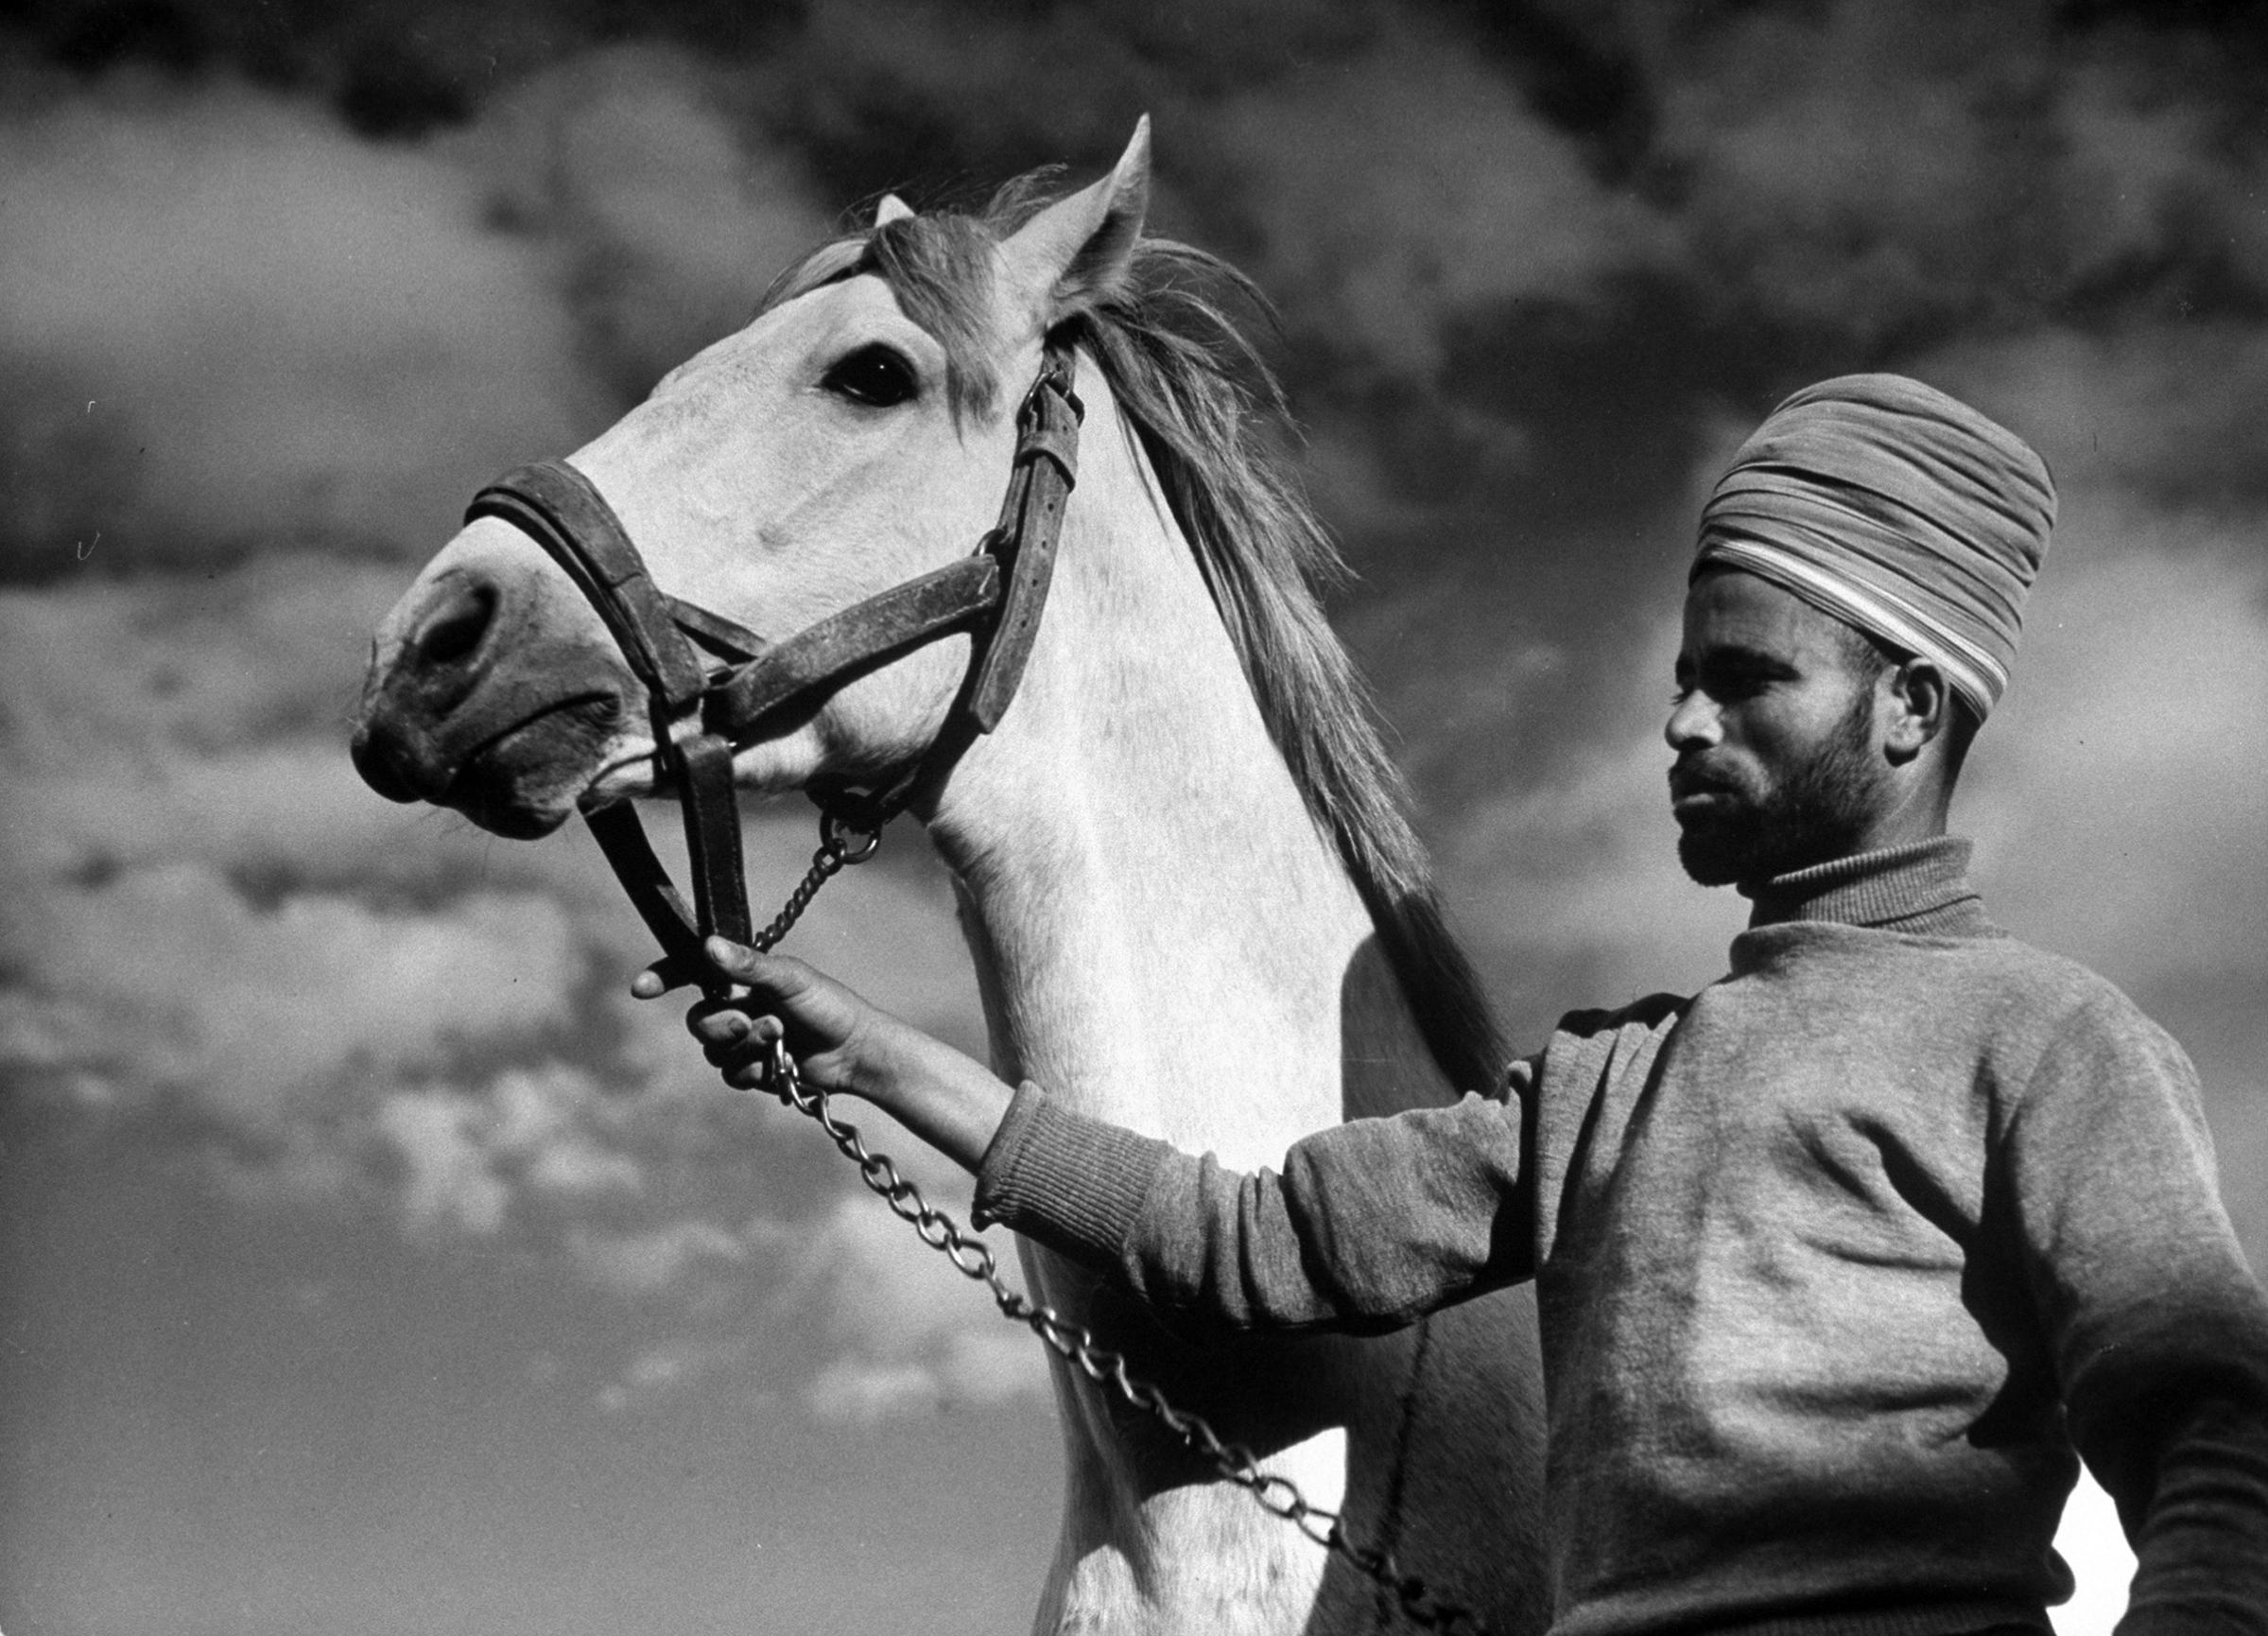 Moroccan soldier of the French expeditionary force, holding the General's Arabian horse, at garrison in the great citadel, 1940.